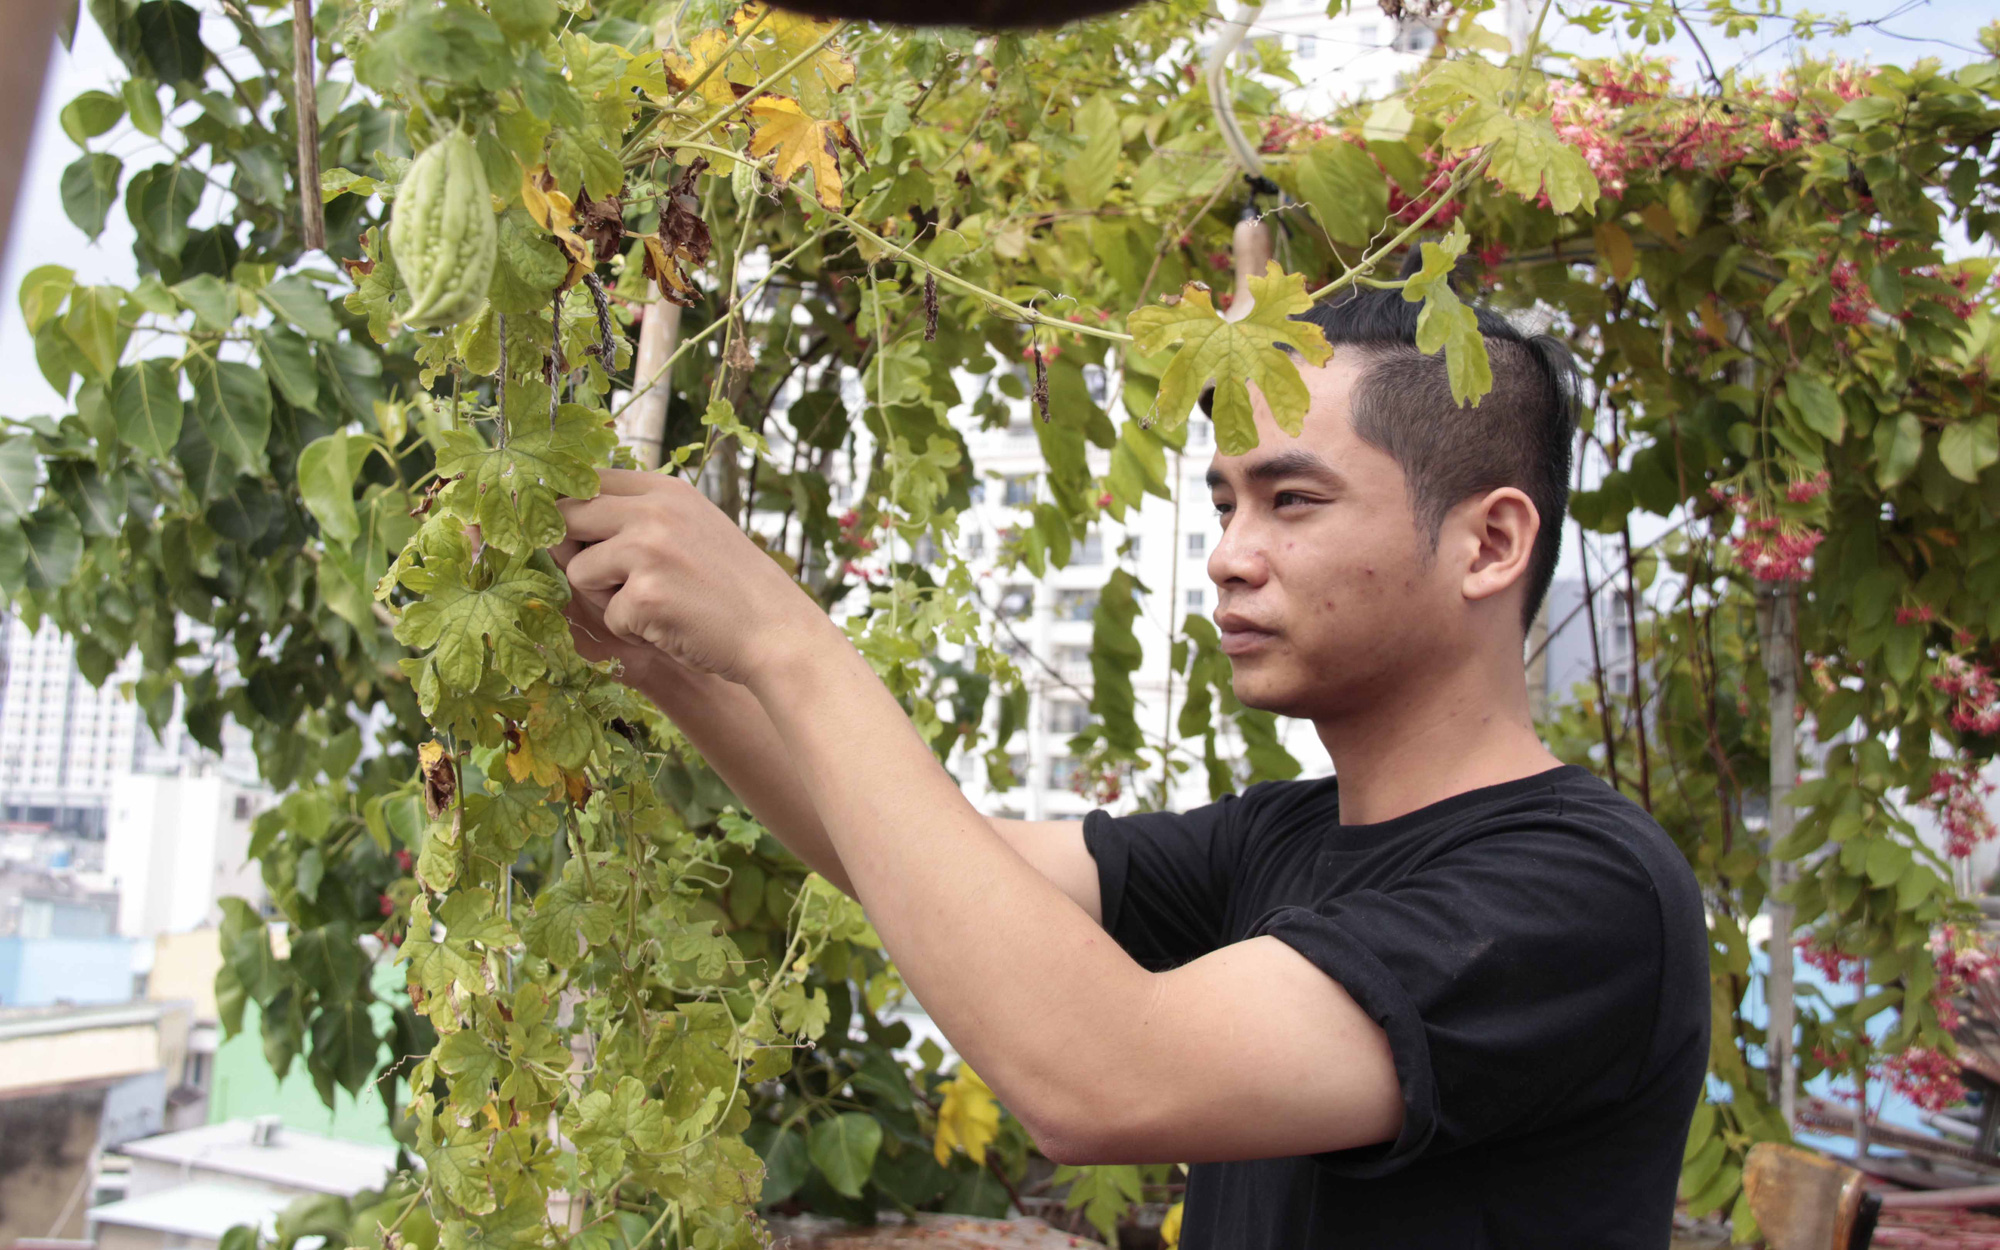 Saigonese sowing seeds of sustainable agriculture in concrete jungle